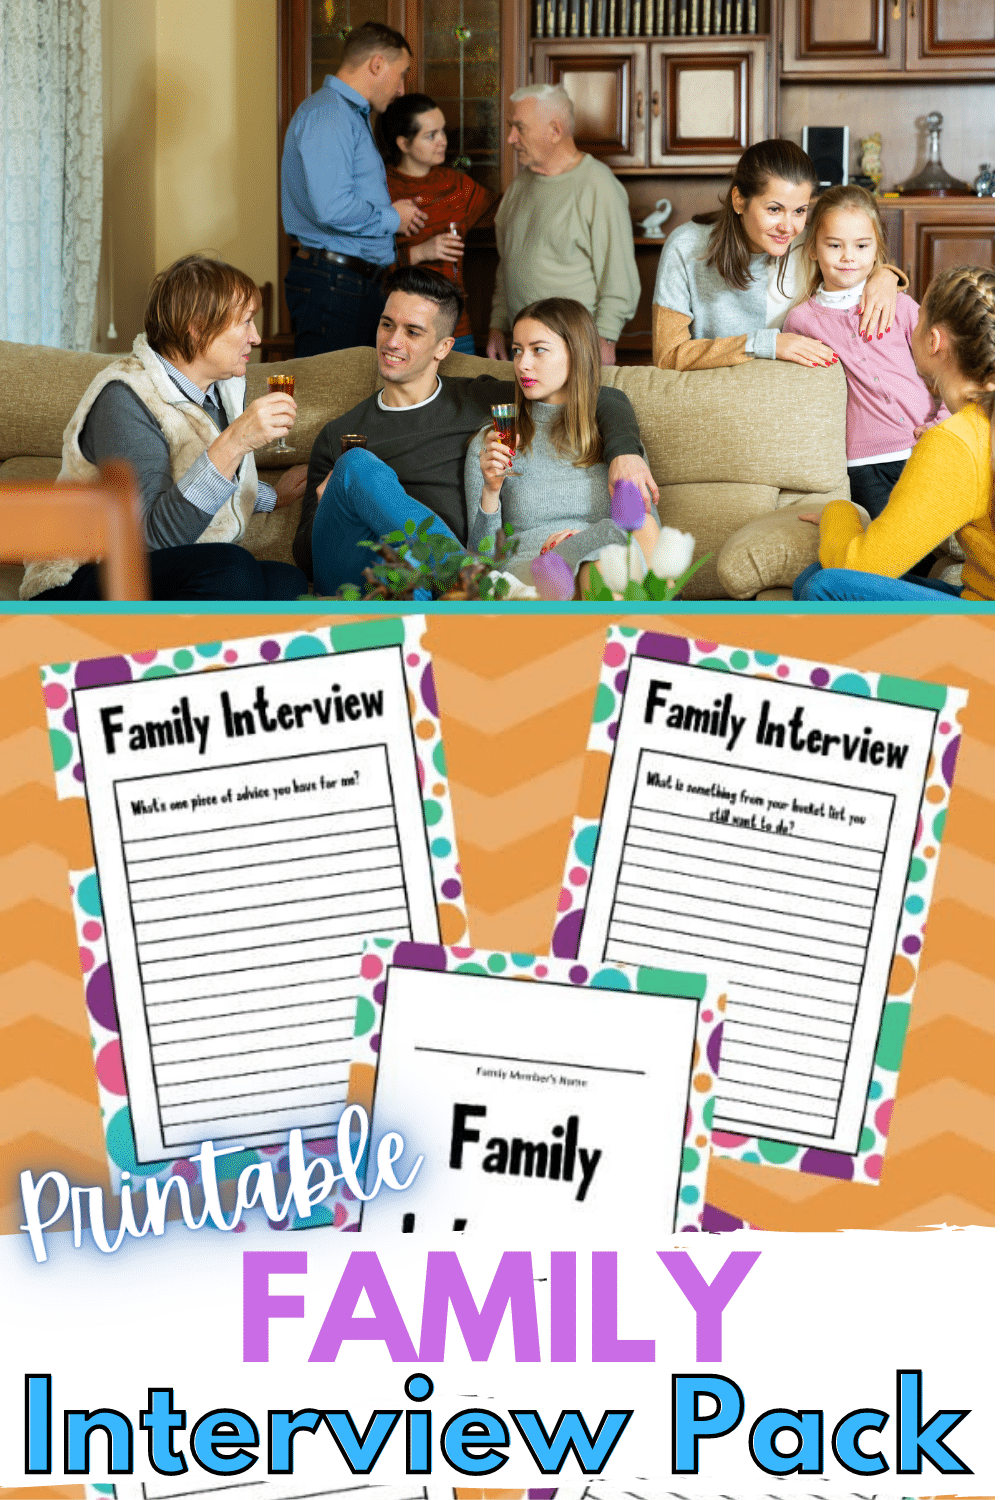 This 14-page printable family interview pack is the perfect way for kids to get to know their older relatives better and hear family stories. #printables #familyinterview #freeprintables via @wondermomwannab